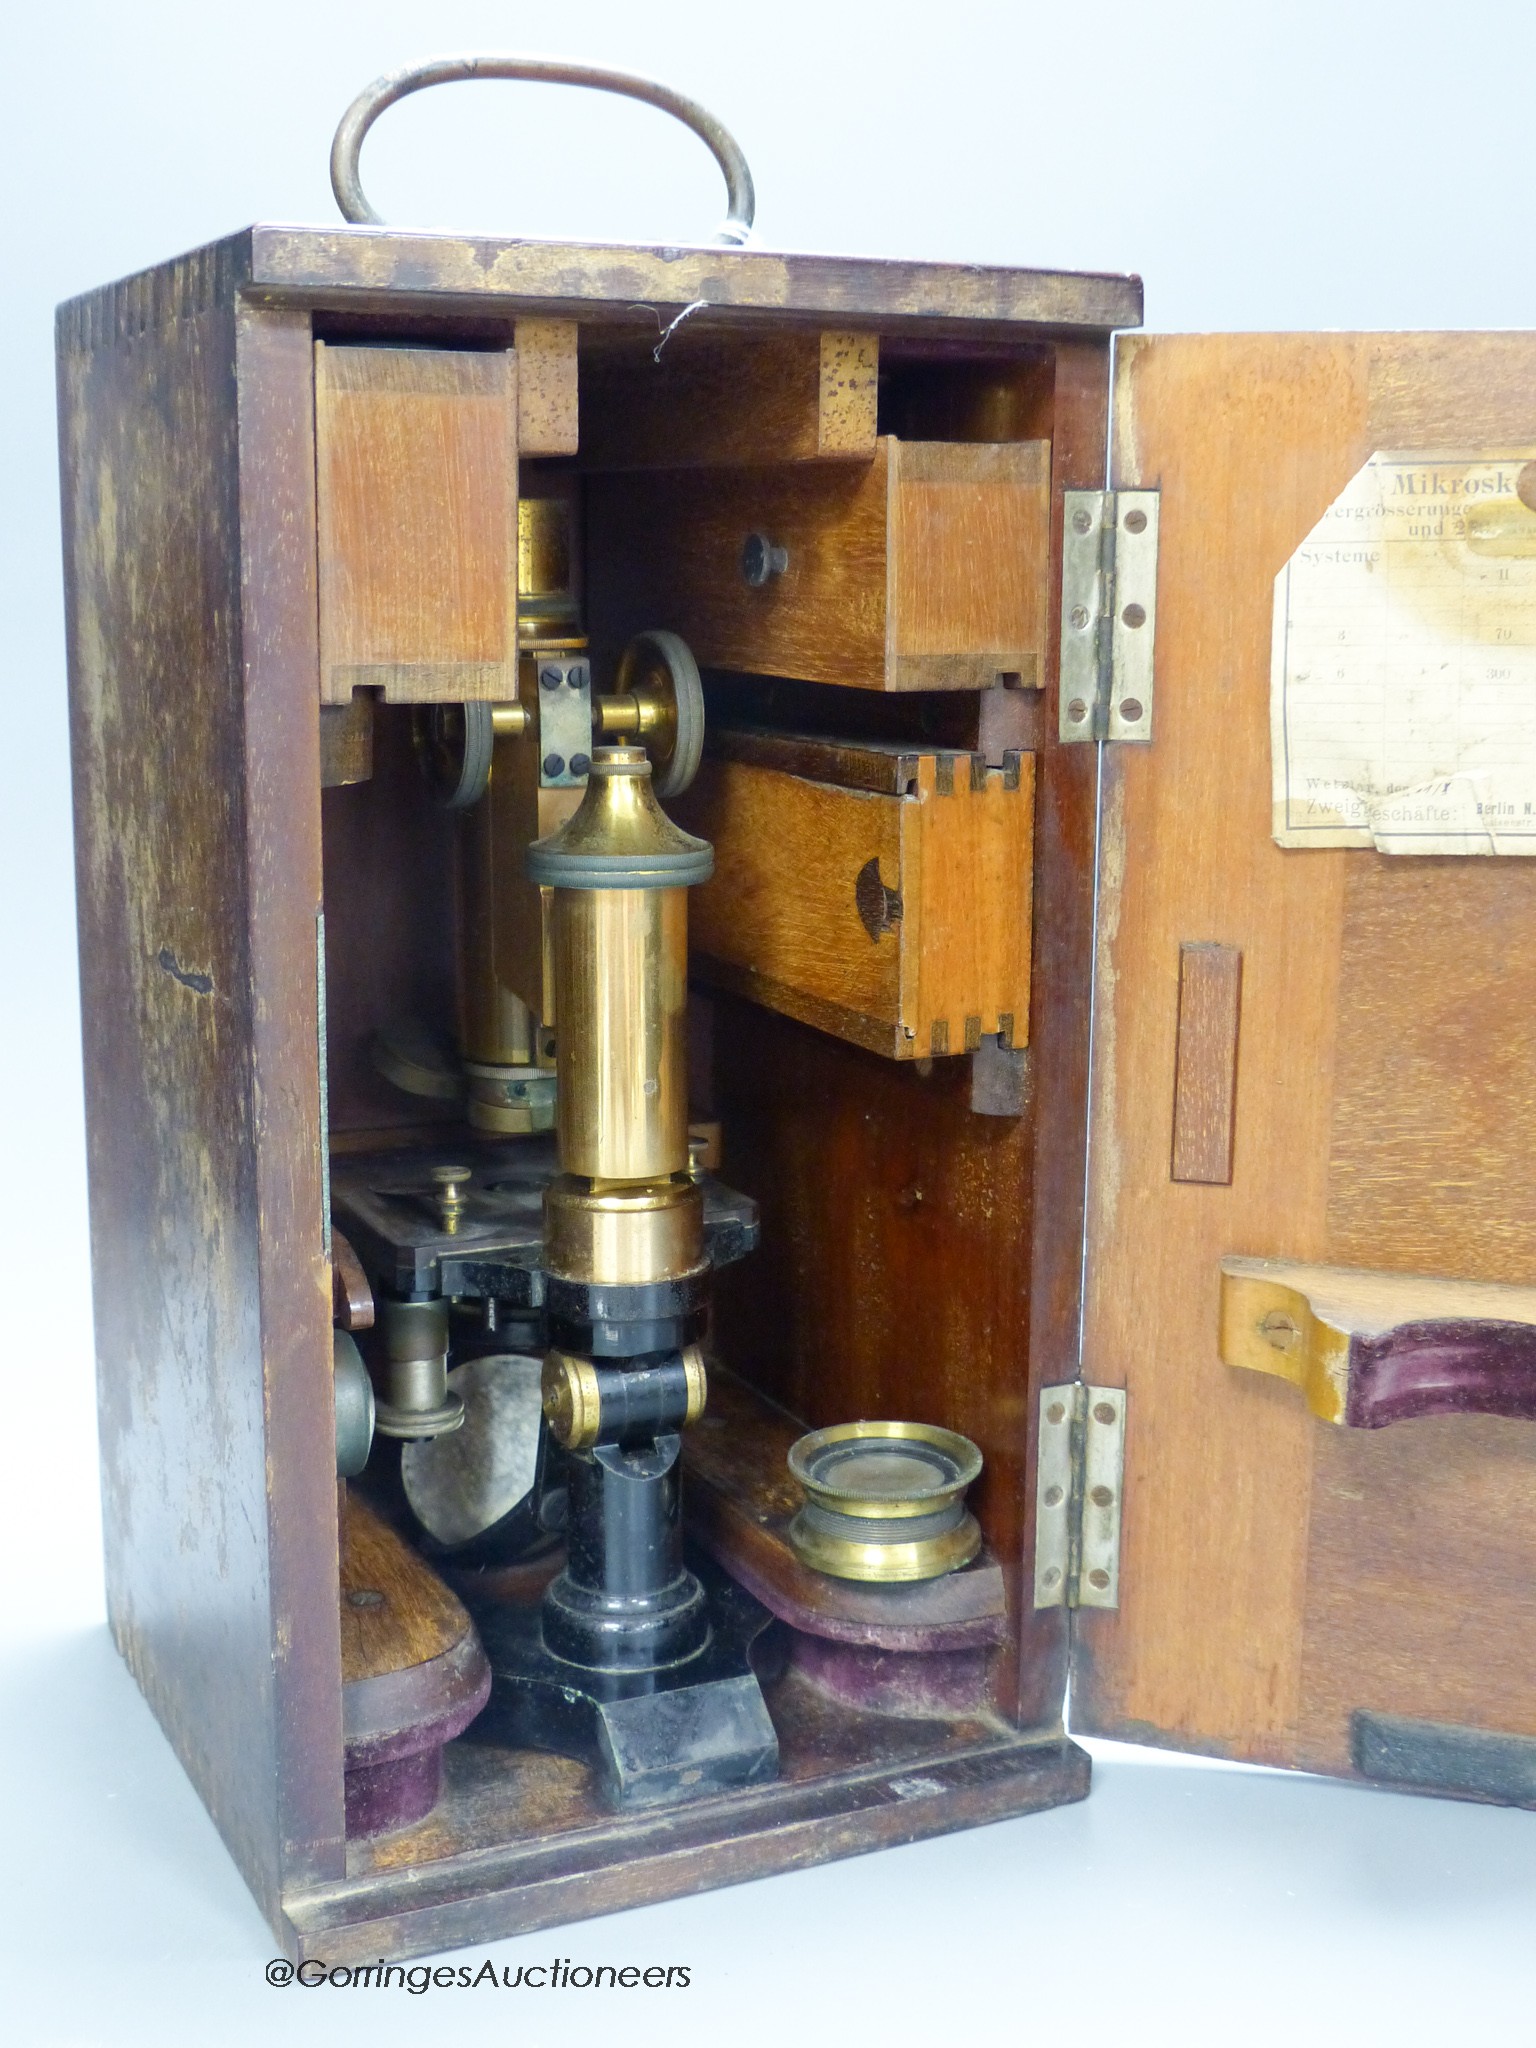 A lacquered brass microscope with lenses by E. Leitz, boxed